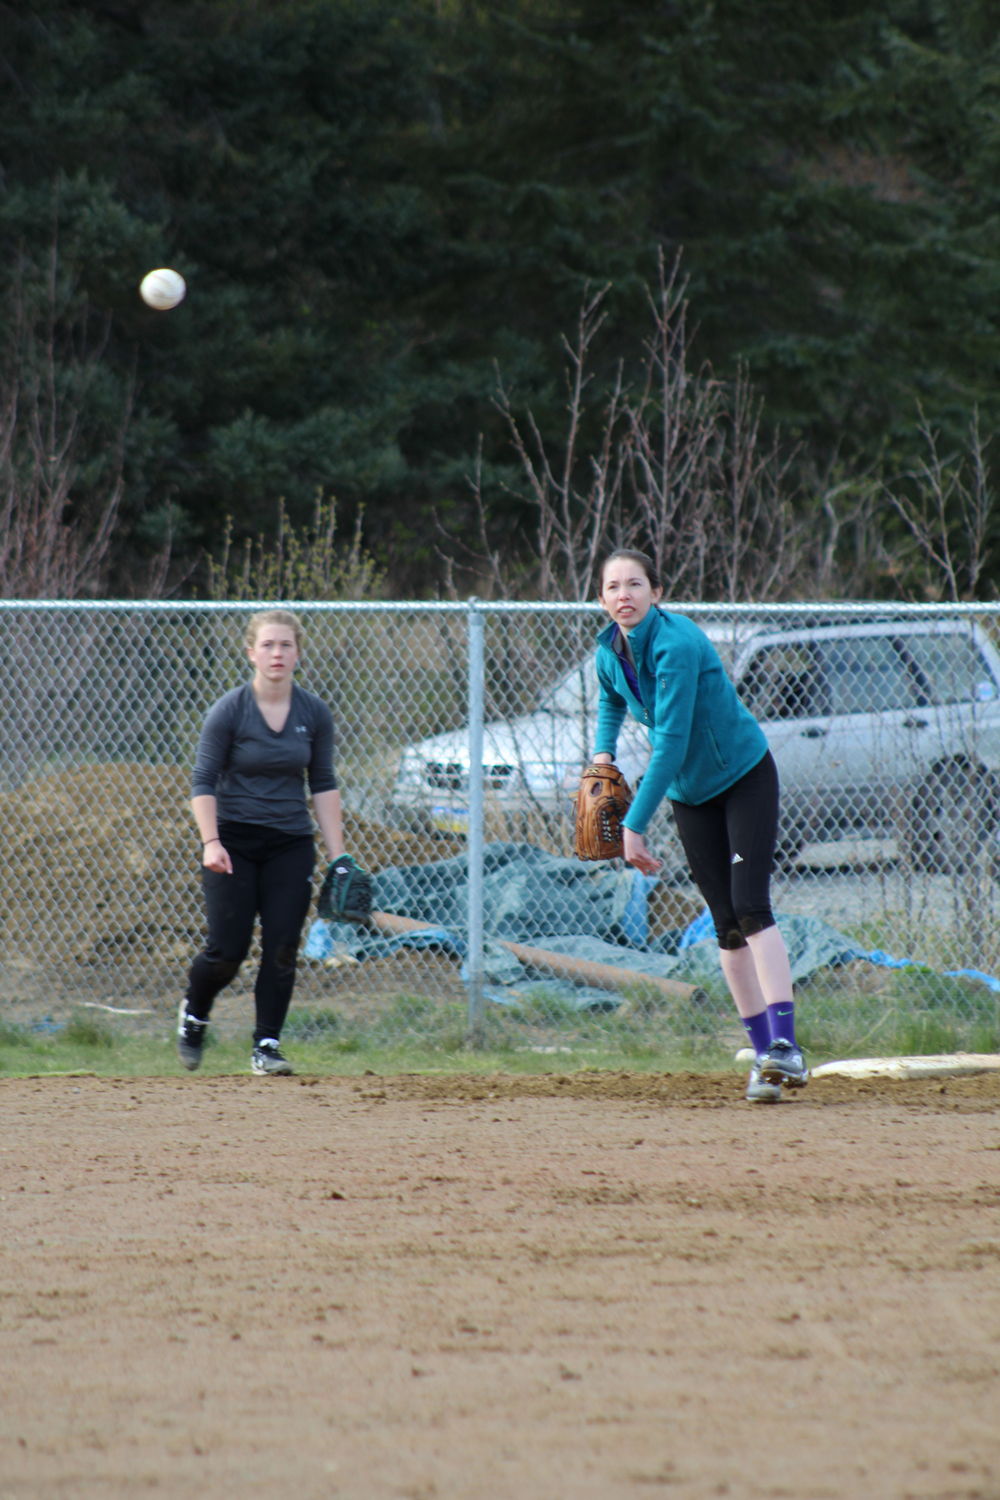 PK Woo throws the ball across the field during a throwing and catching drill at practice. The varsity softball team will play their first game of the season against Kenai Central High School on Tuesday, April 26.-Photo by Anna Frost; Homer News